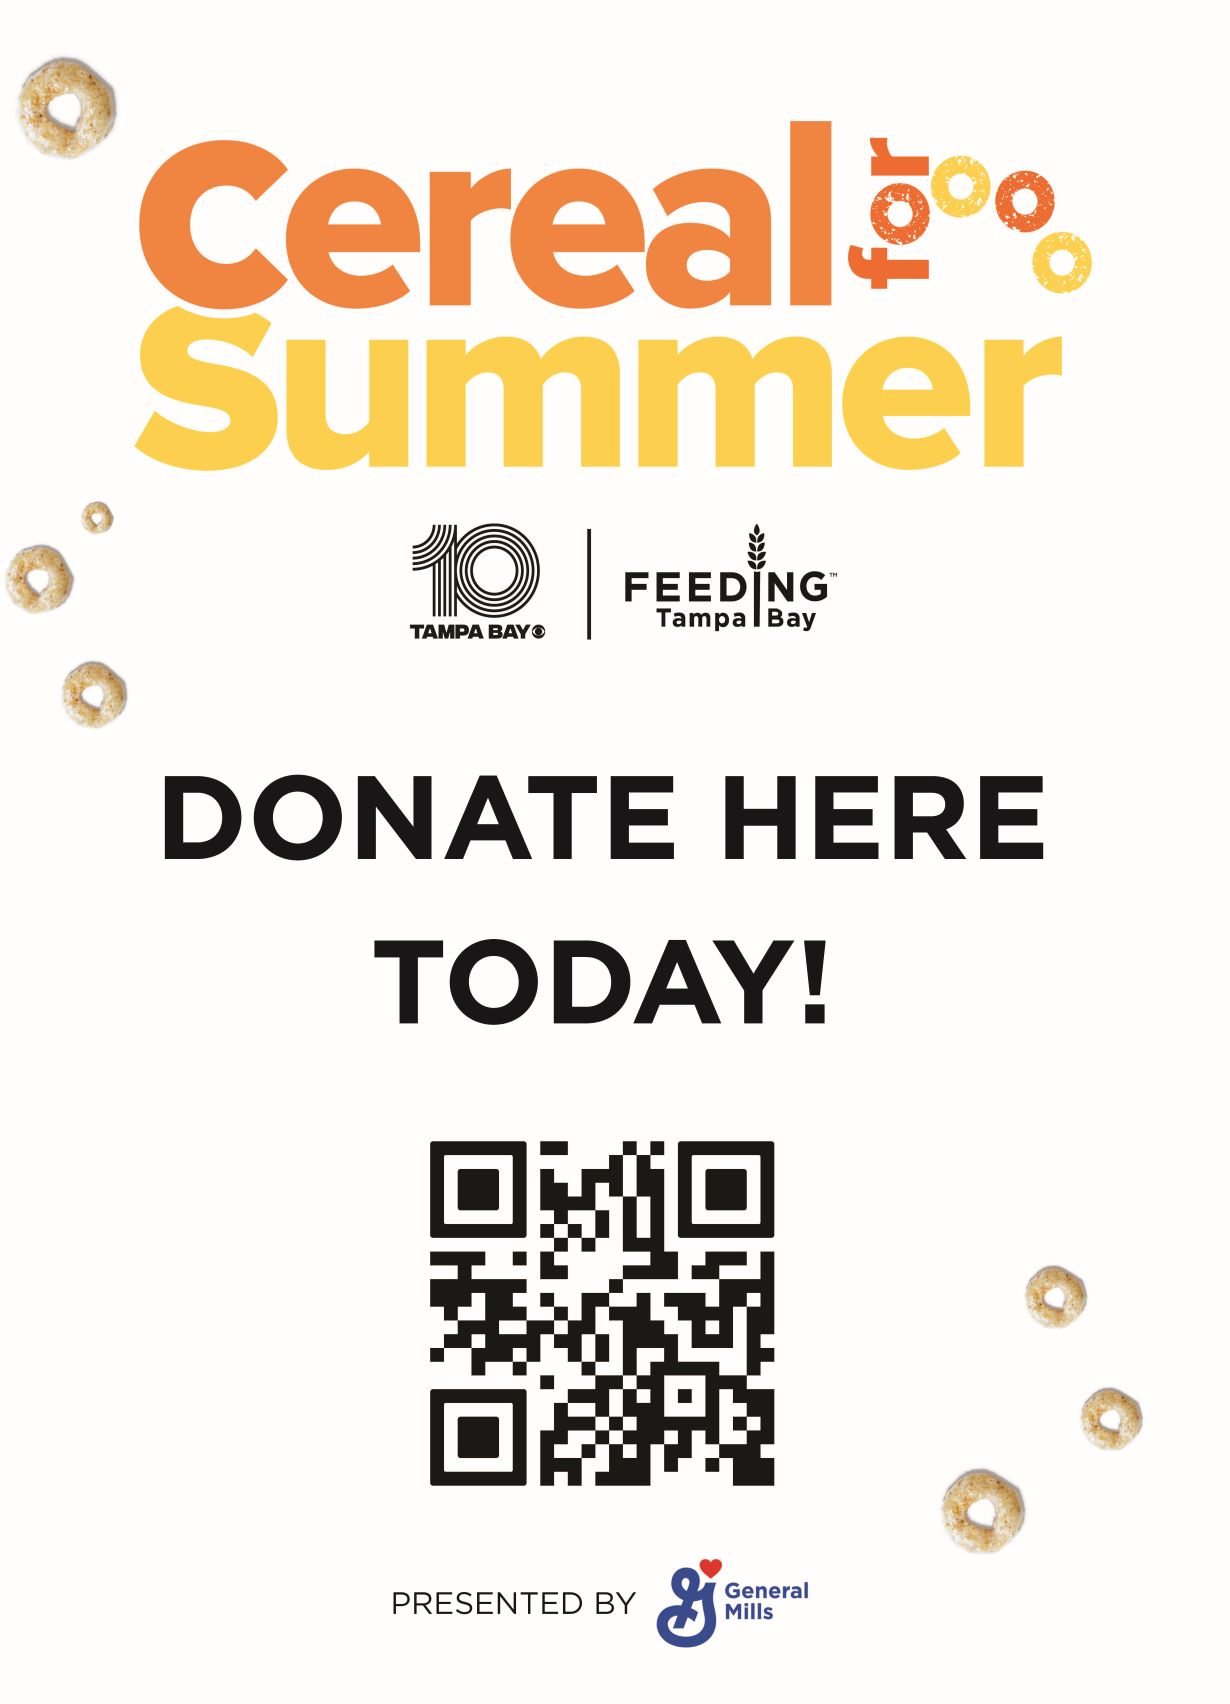 QR code allowing you to donate to the Cereal for Summer campaign